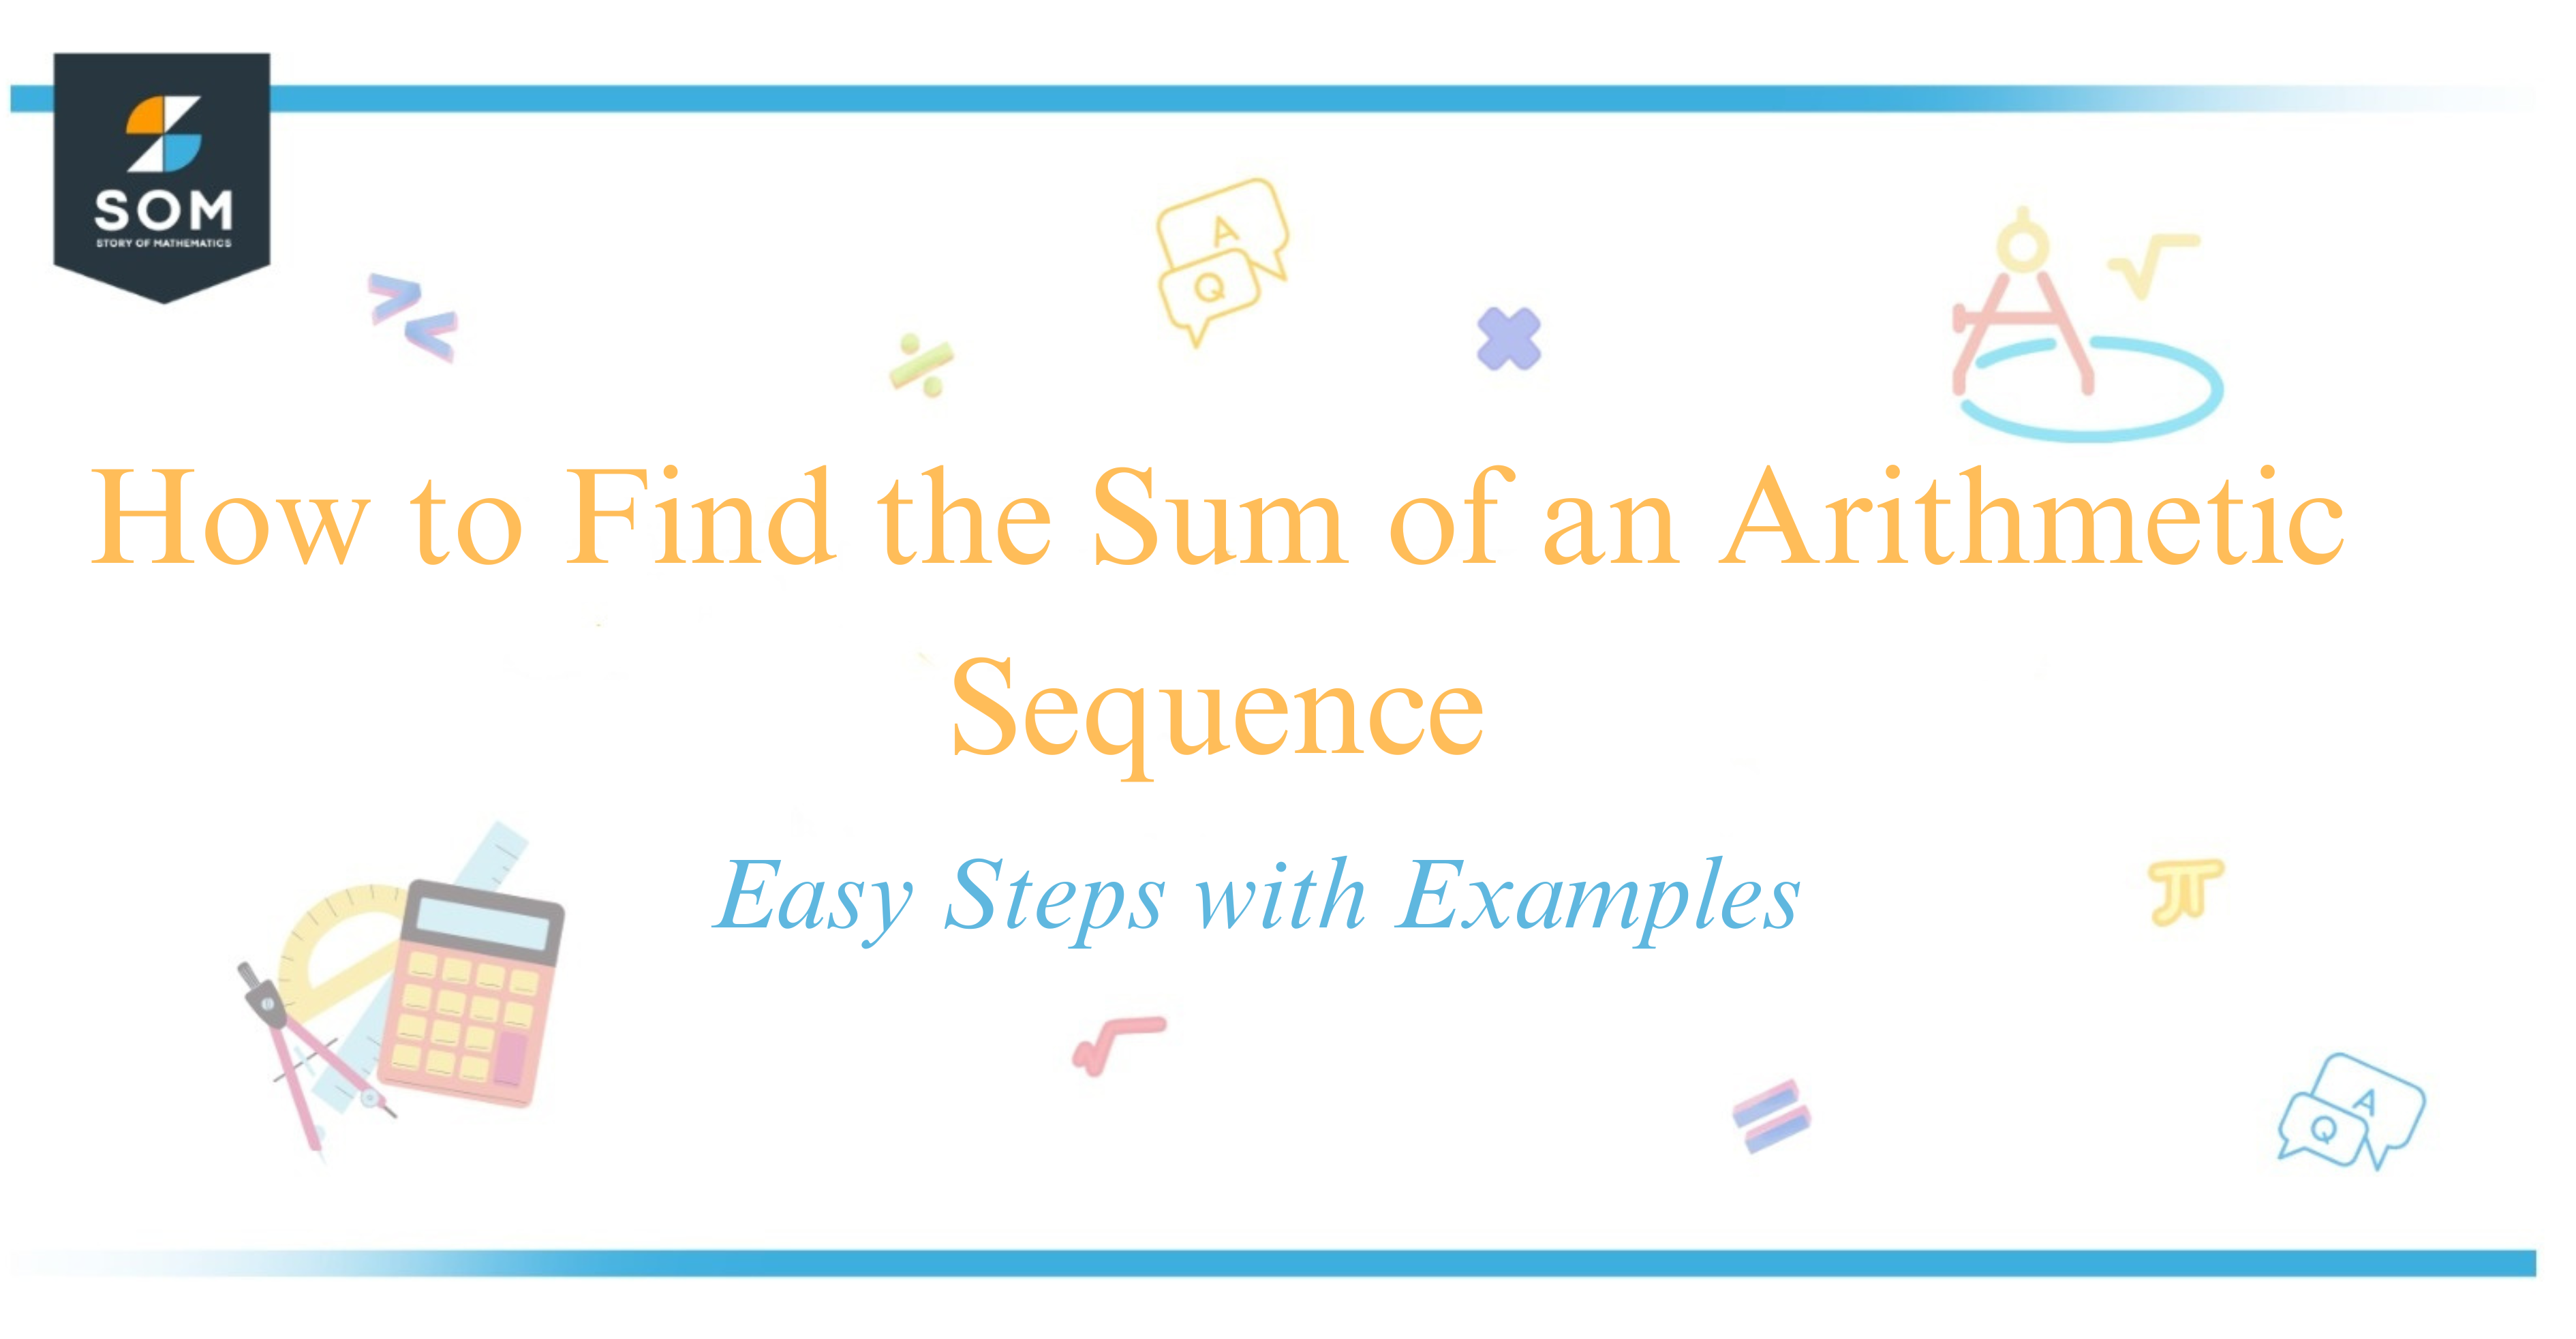 How to Find the Sum of an Arithmetic Sequence Easy Steps with Examples